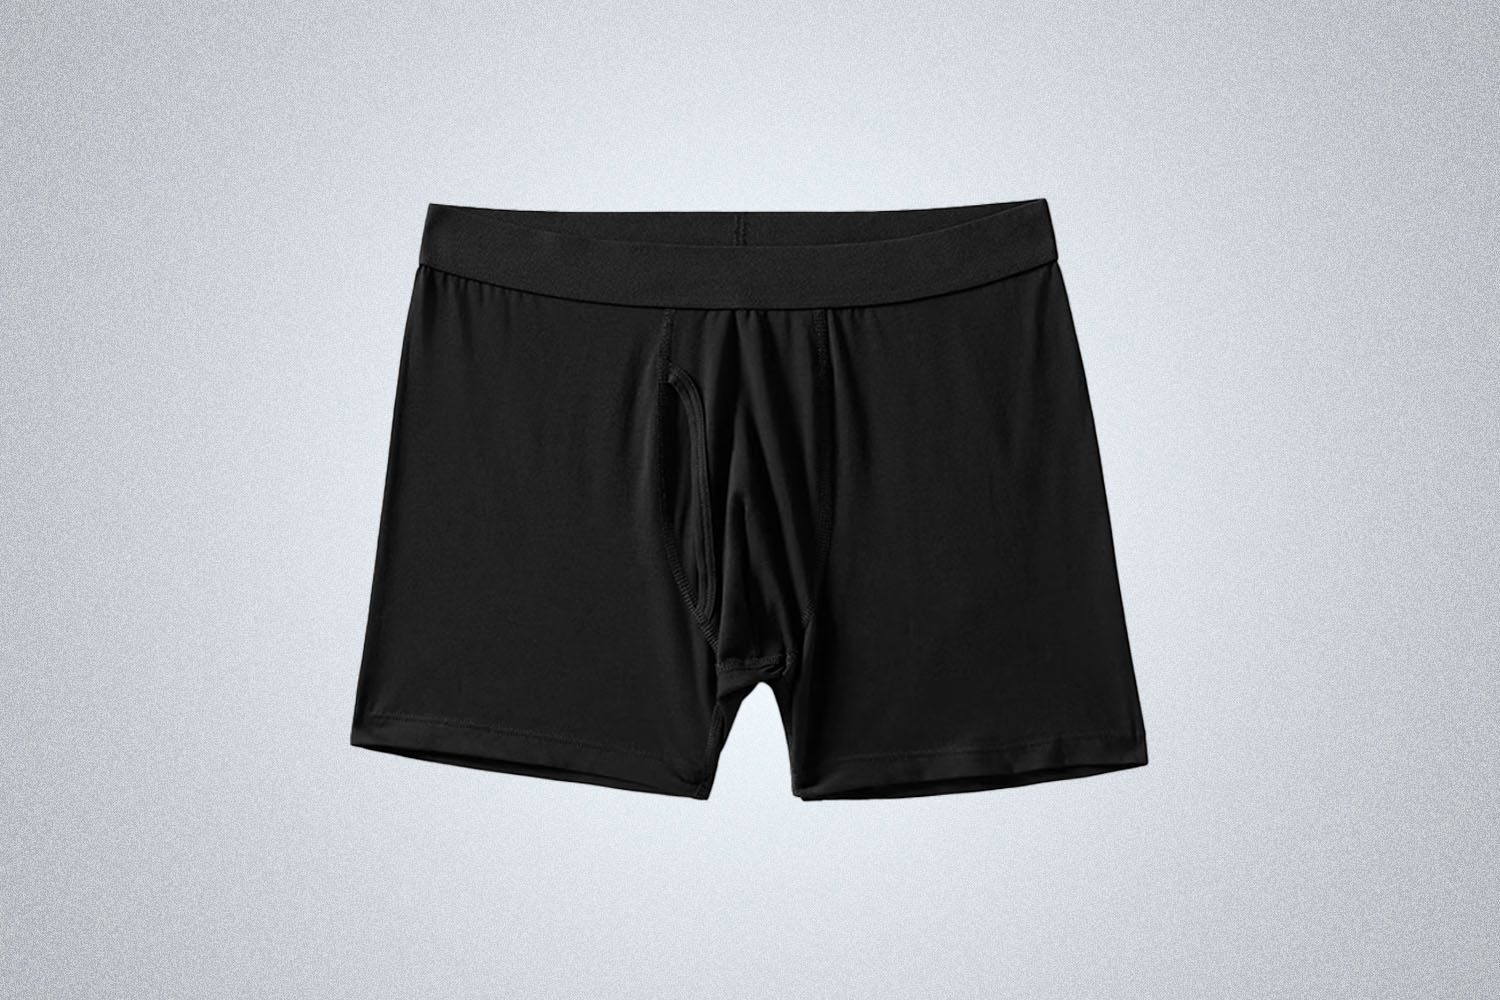 UNIQLO AIRism Boxer Briefs Black/Navy S-4XL Front Opening